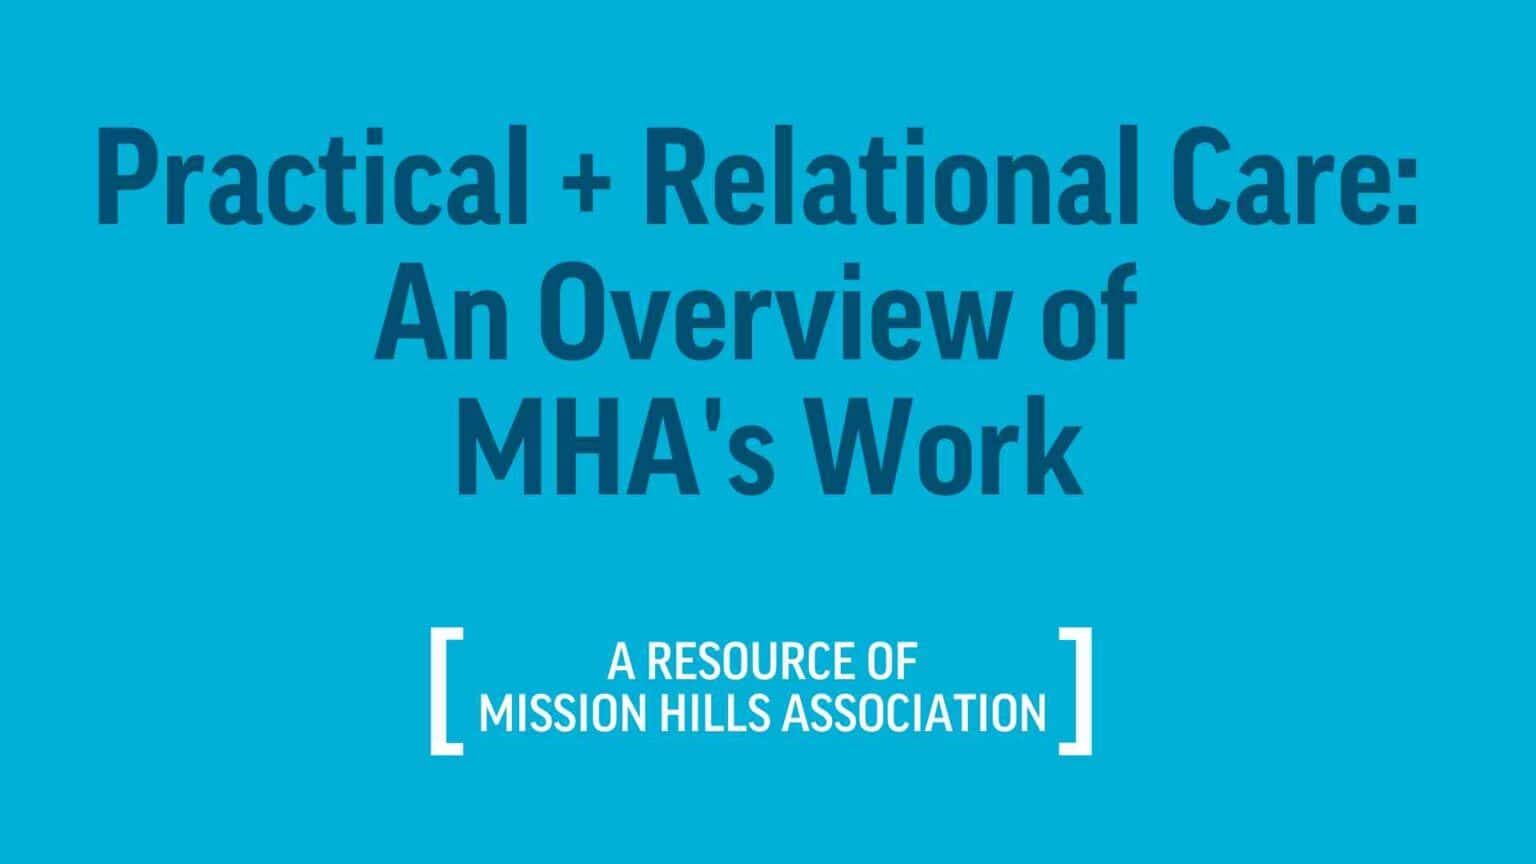 Practical and Relational Care: An Overview of MHA’s Work